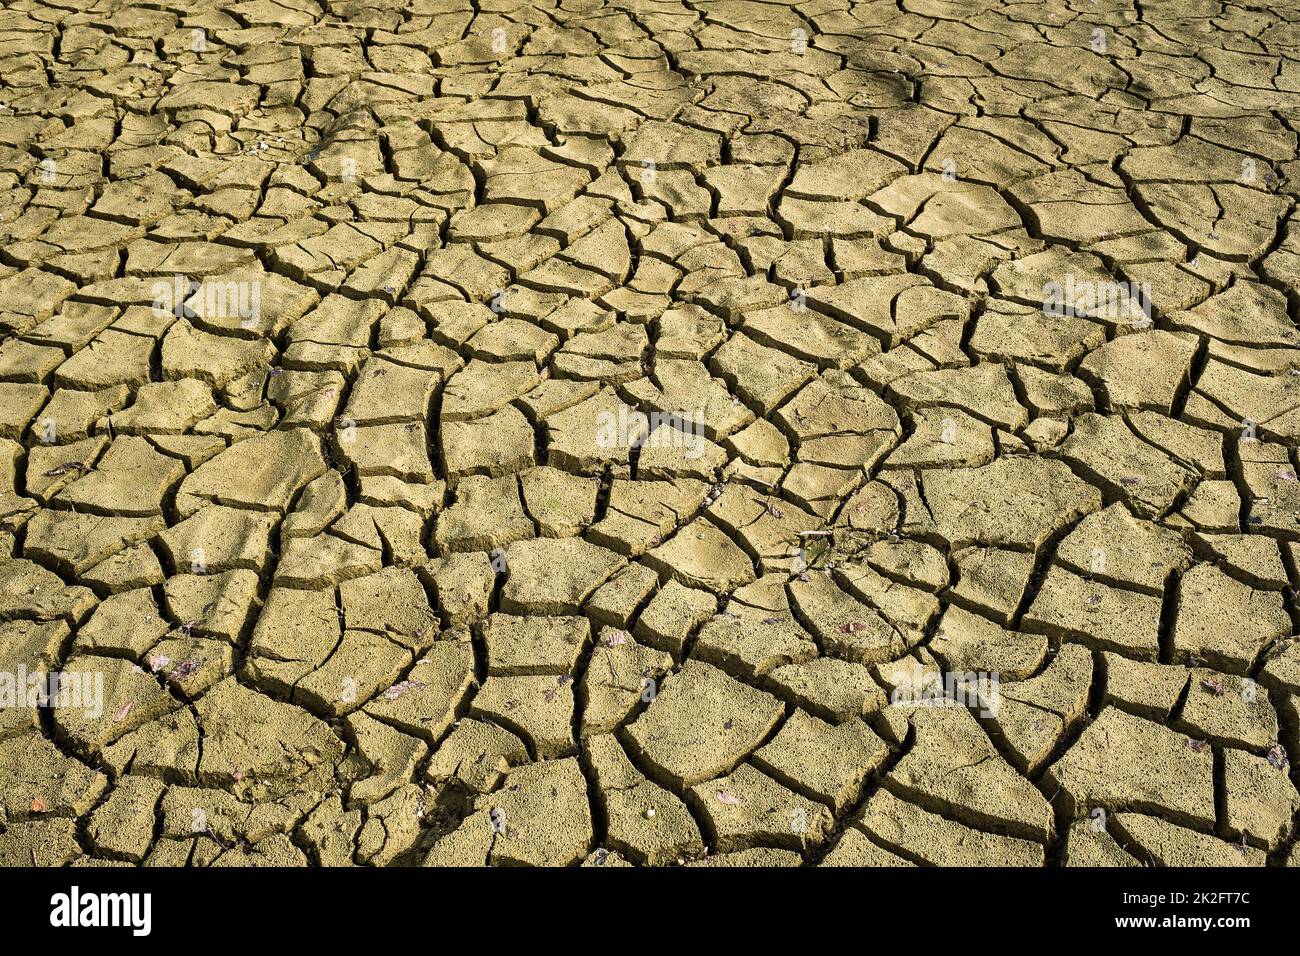 Cracked dry earth with cracks texture Stock Photo